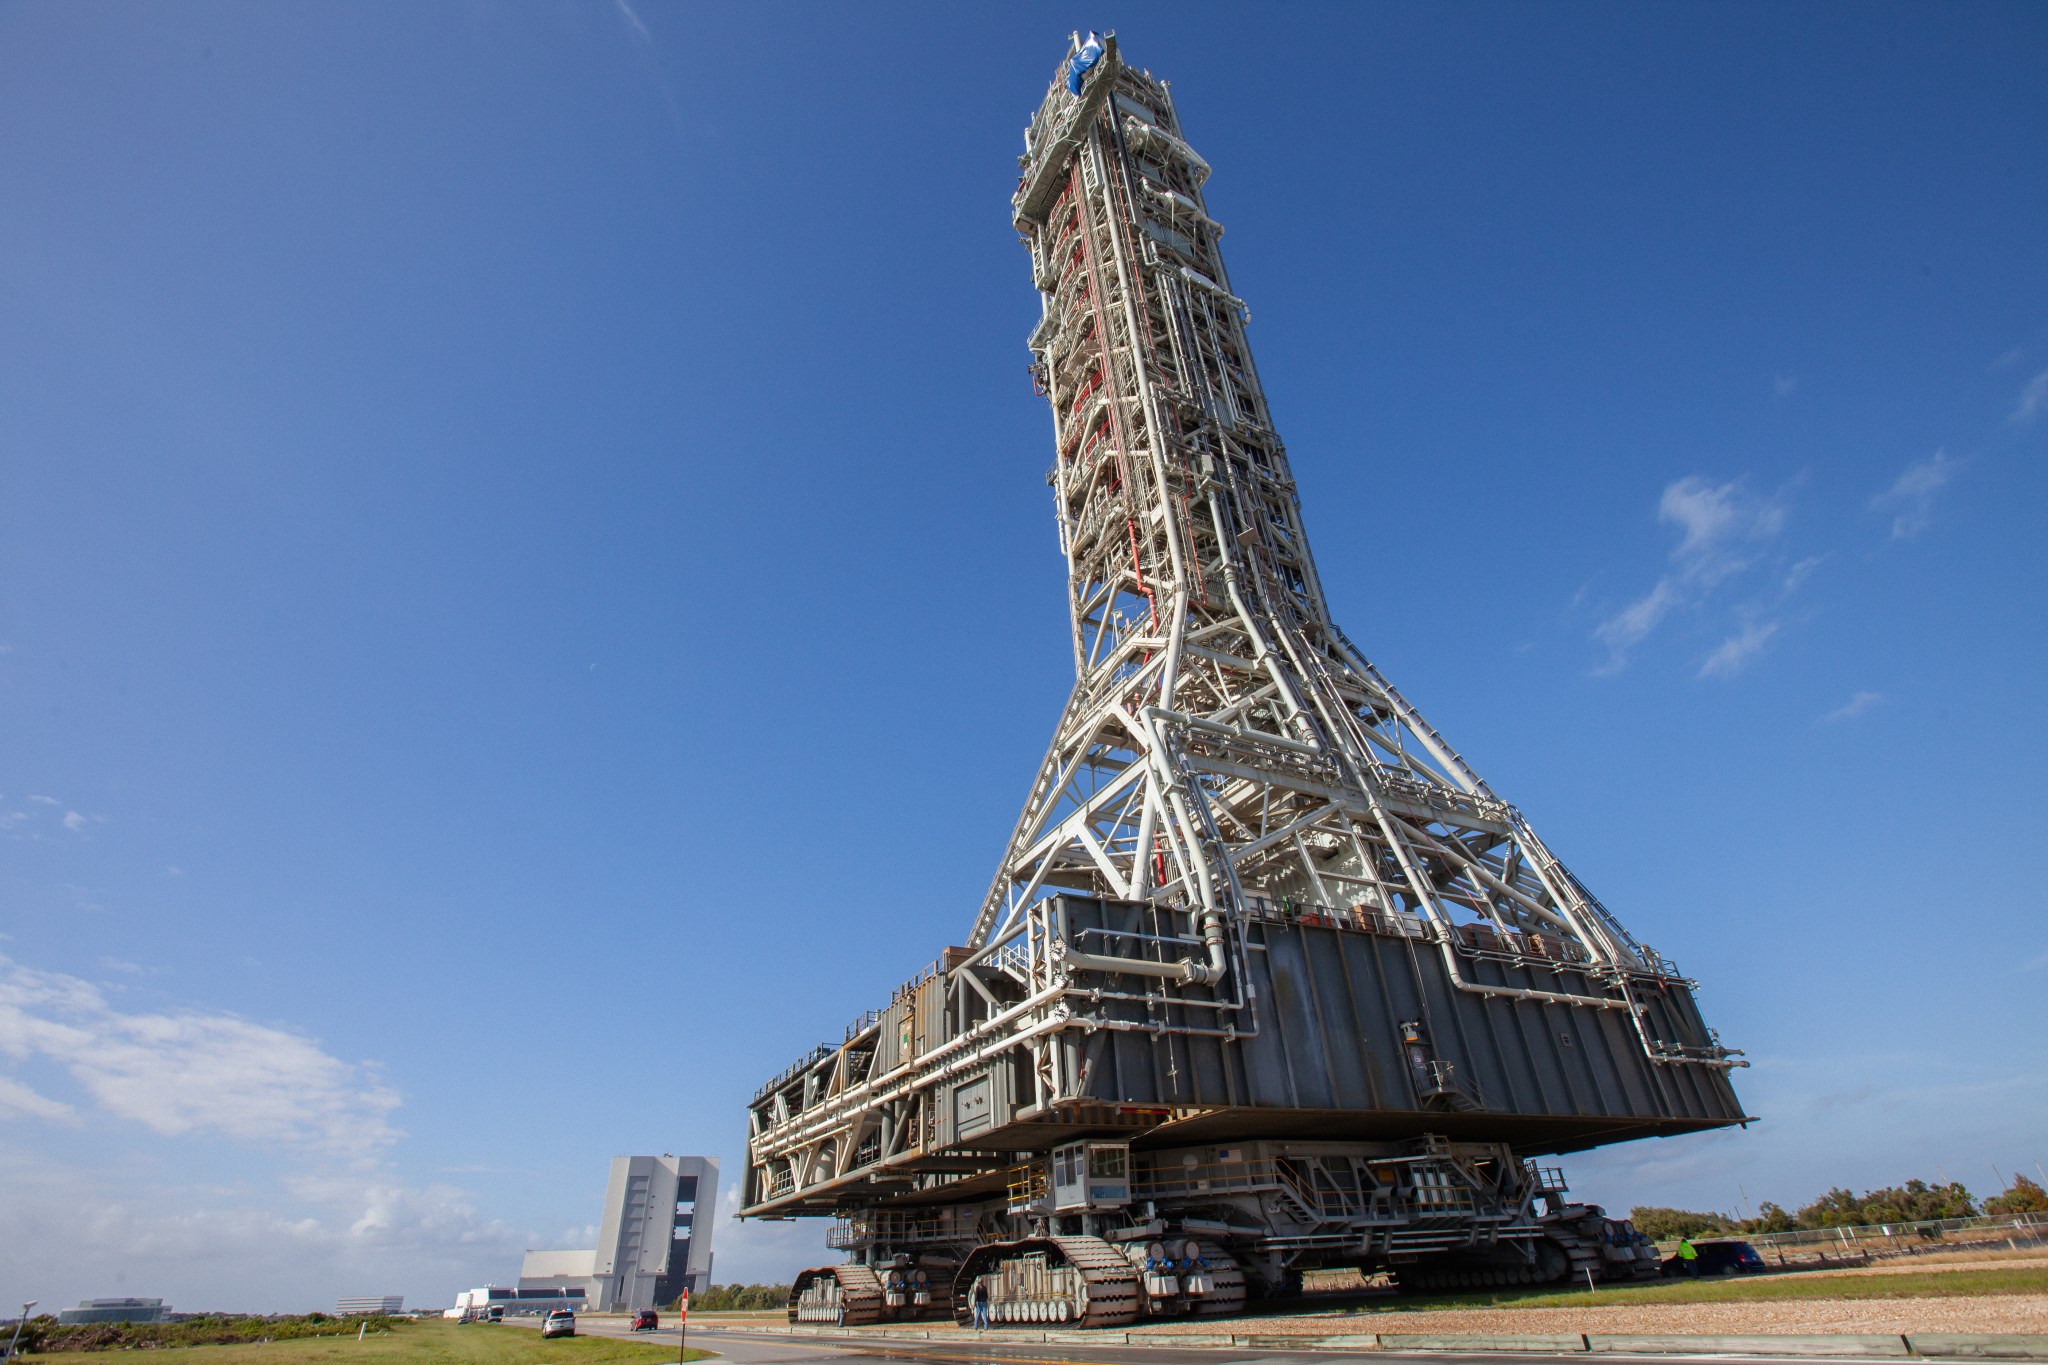 NASA’s mobile launcher, carried atop the crawler-transporter 2, returns to the Vehicle Assembly Building (VAB) on Dec. 20, 2019.